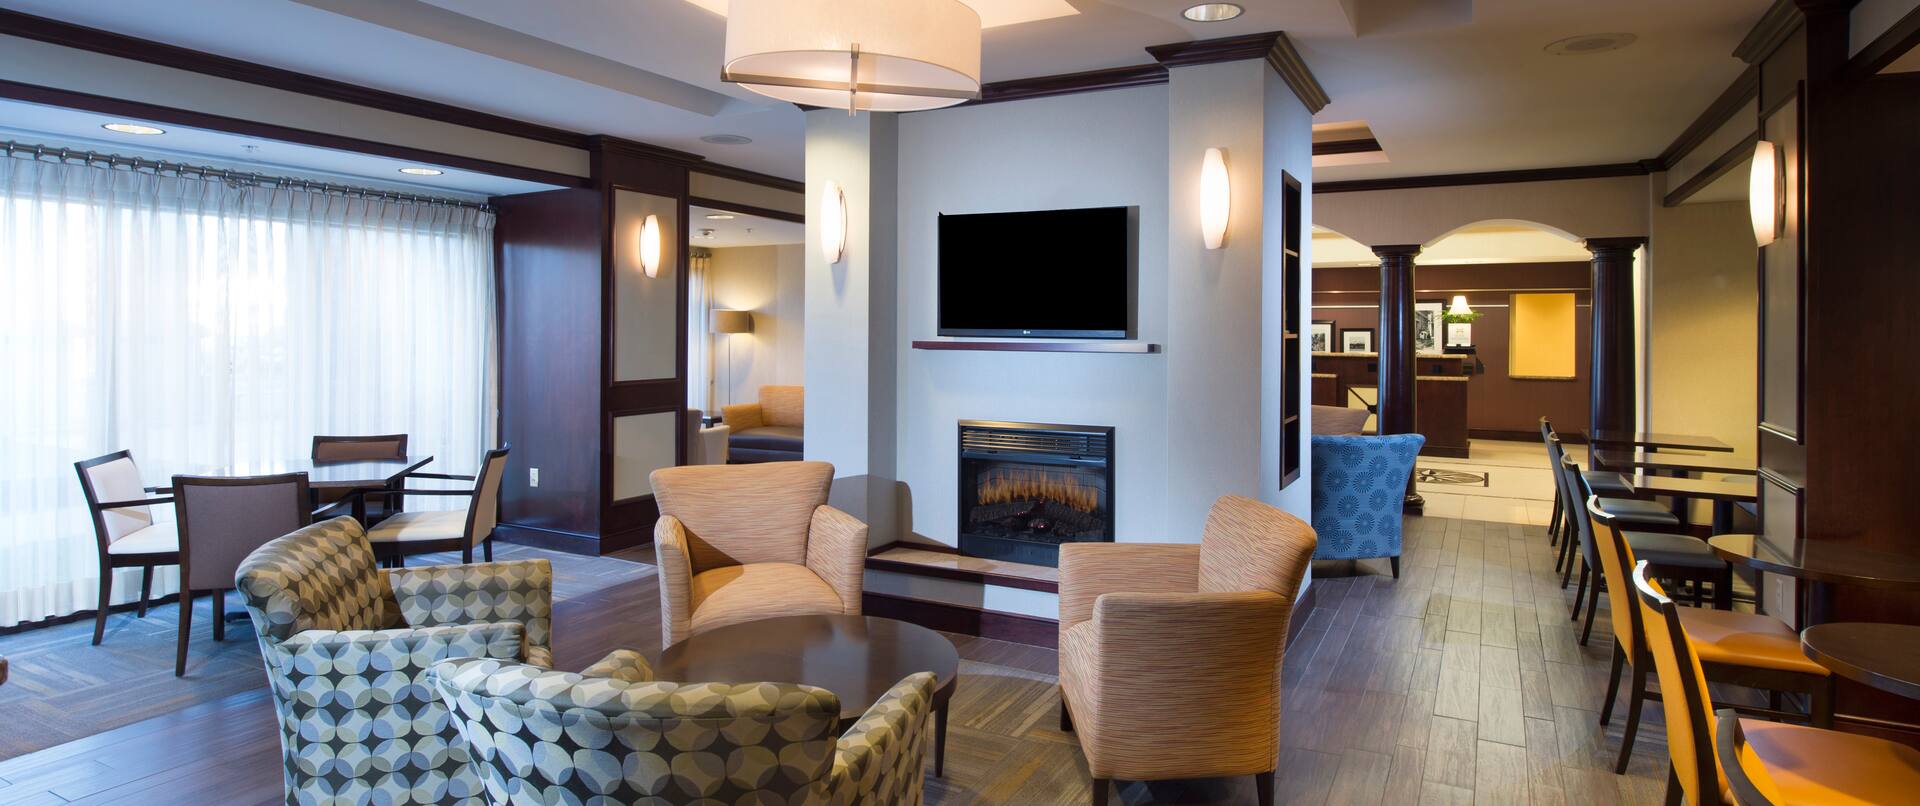 Lobby Seating Fireplace